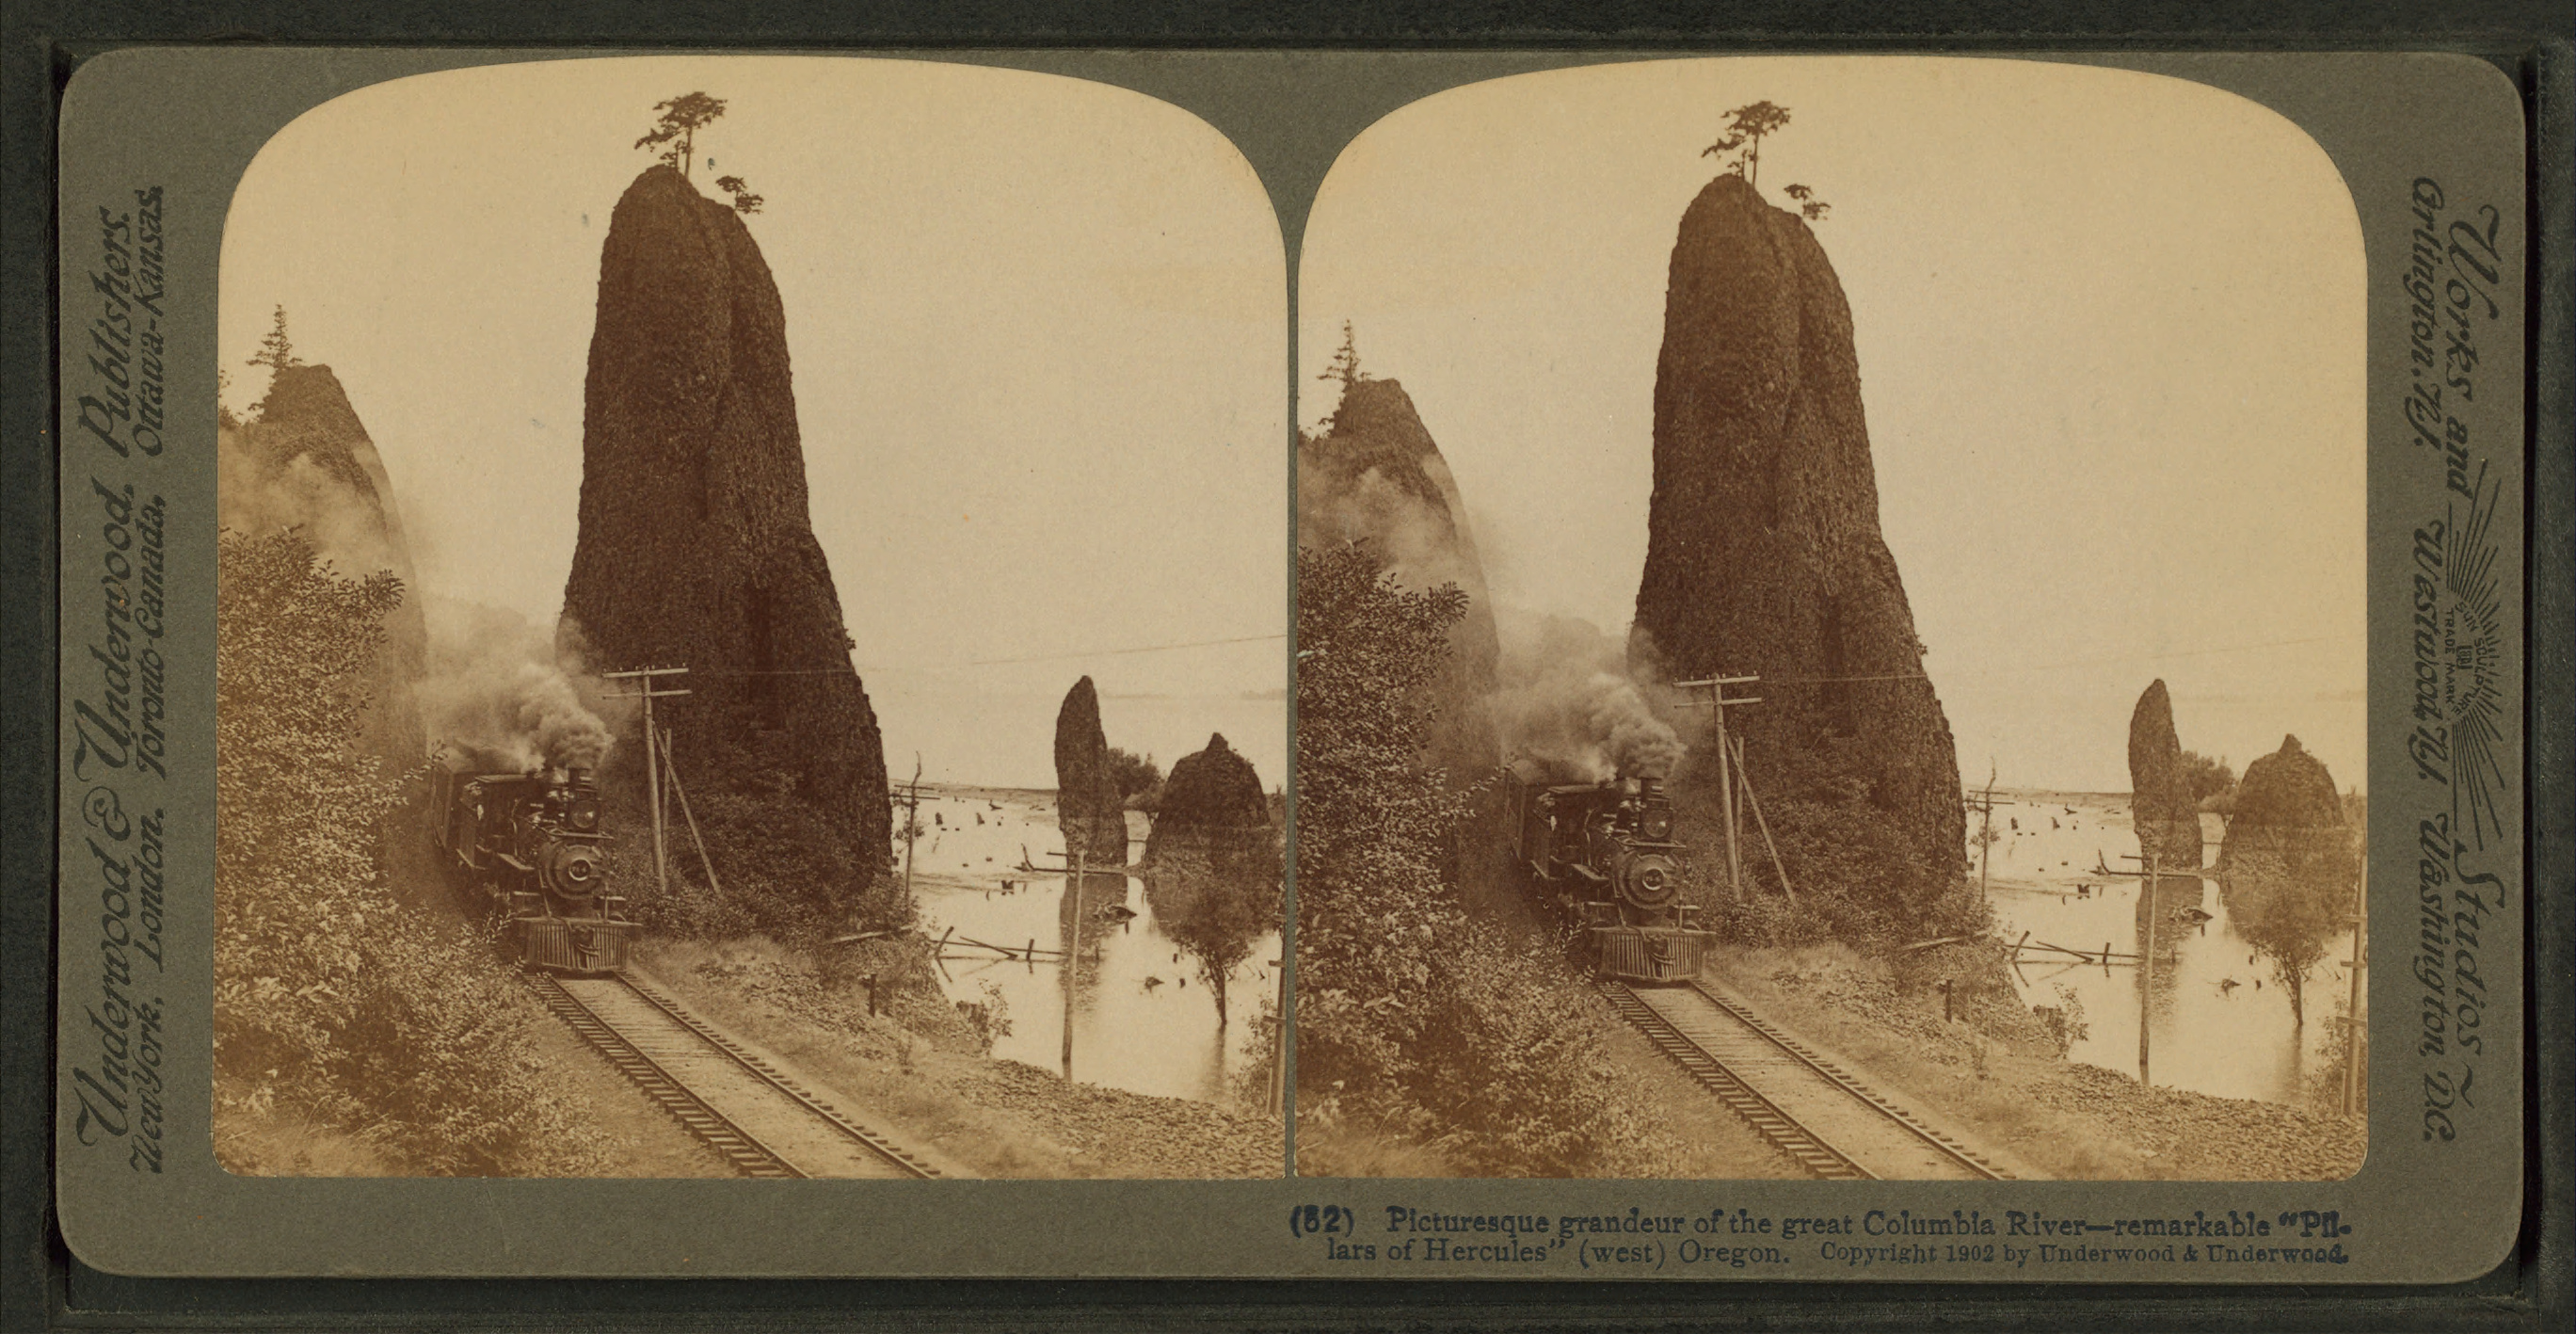 Picturesque grandeur of the great Columbia River, remarkable 'Pillars of Hercules (west) Oregon, from Robert N. Dennis collection of stereoscopic views